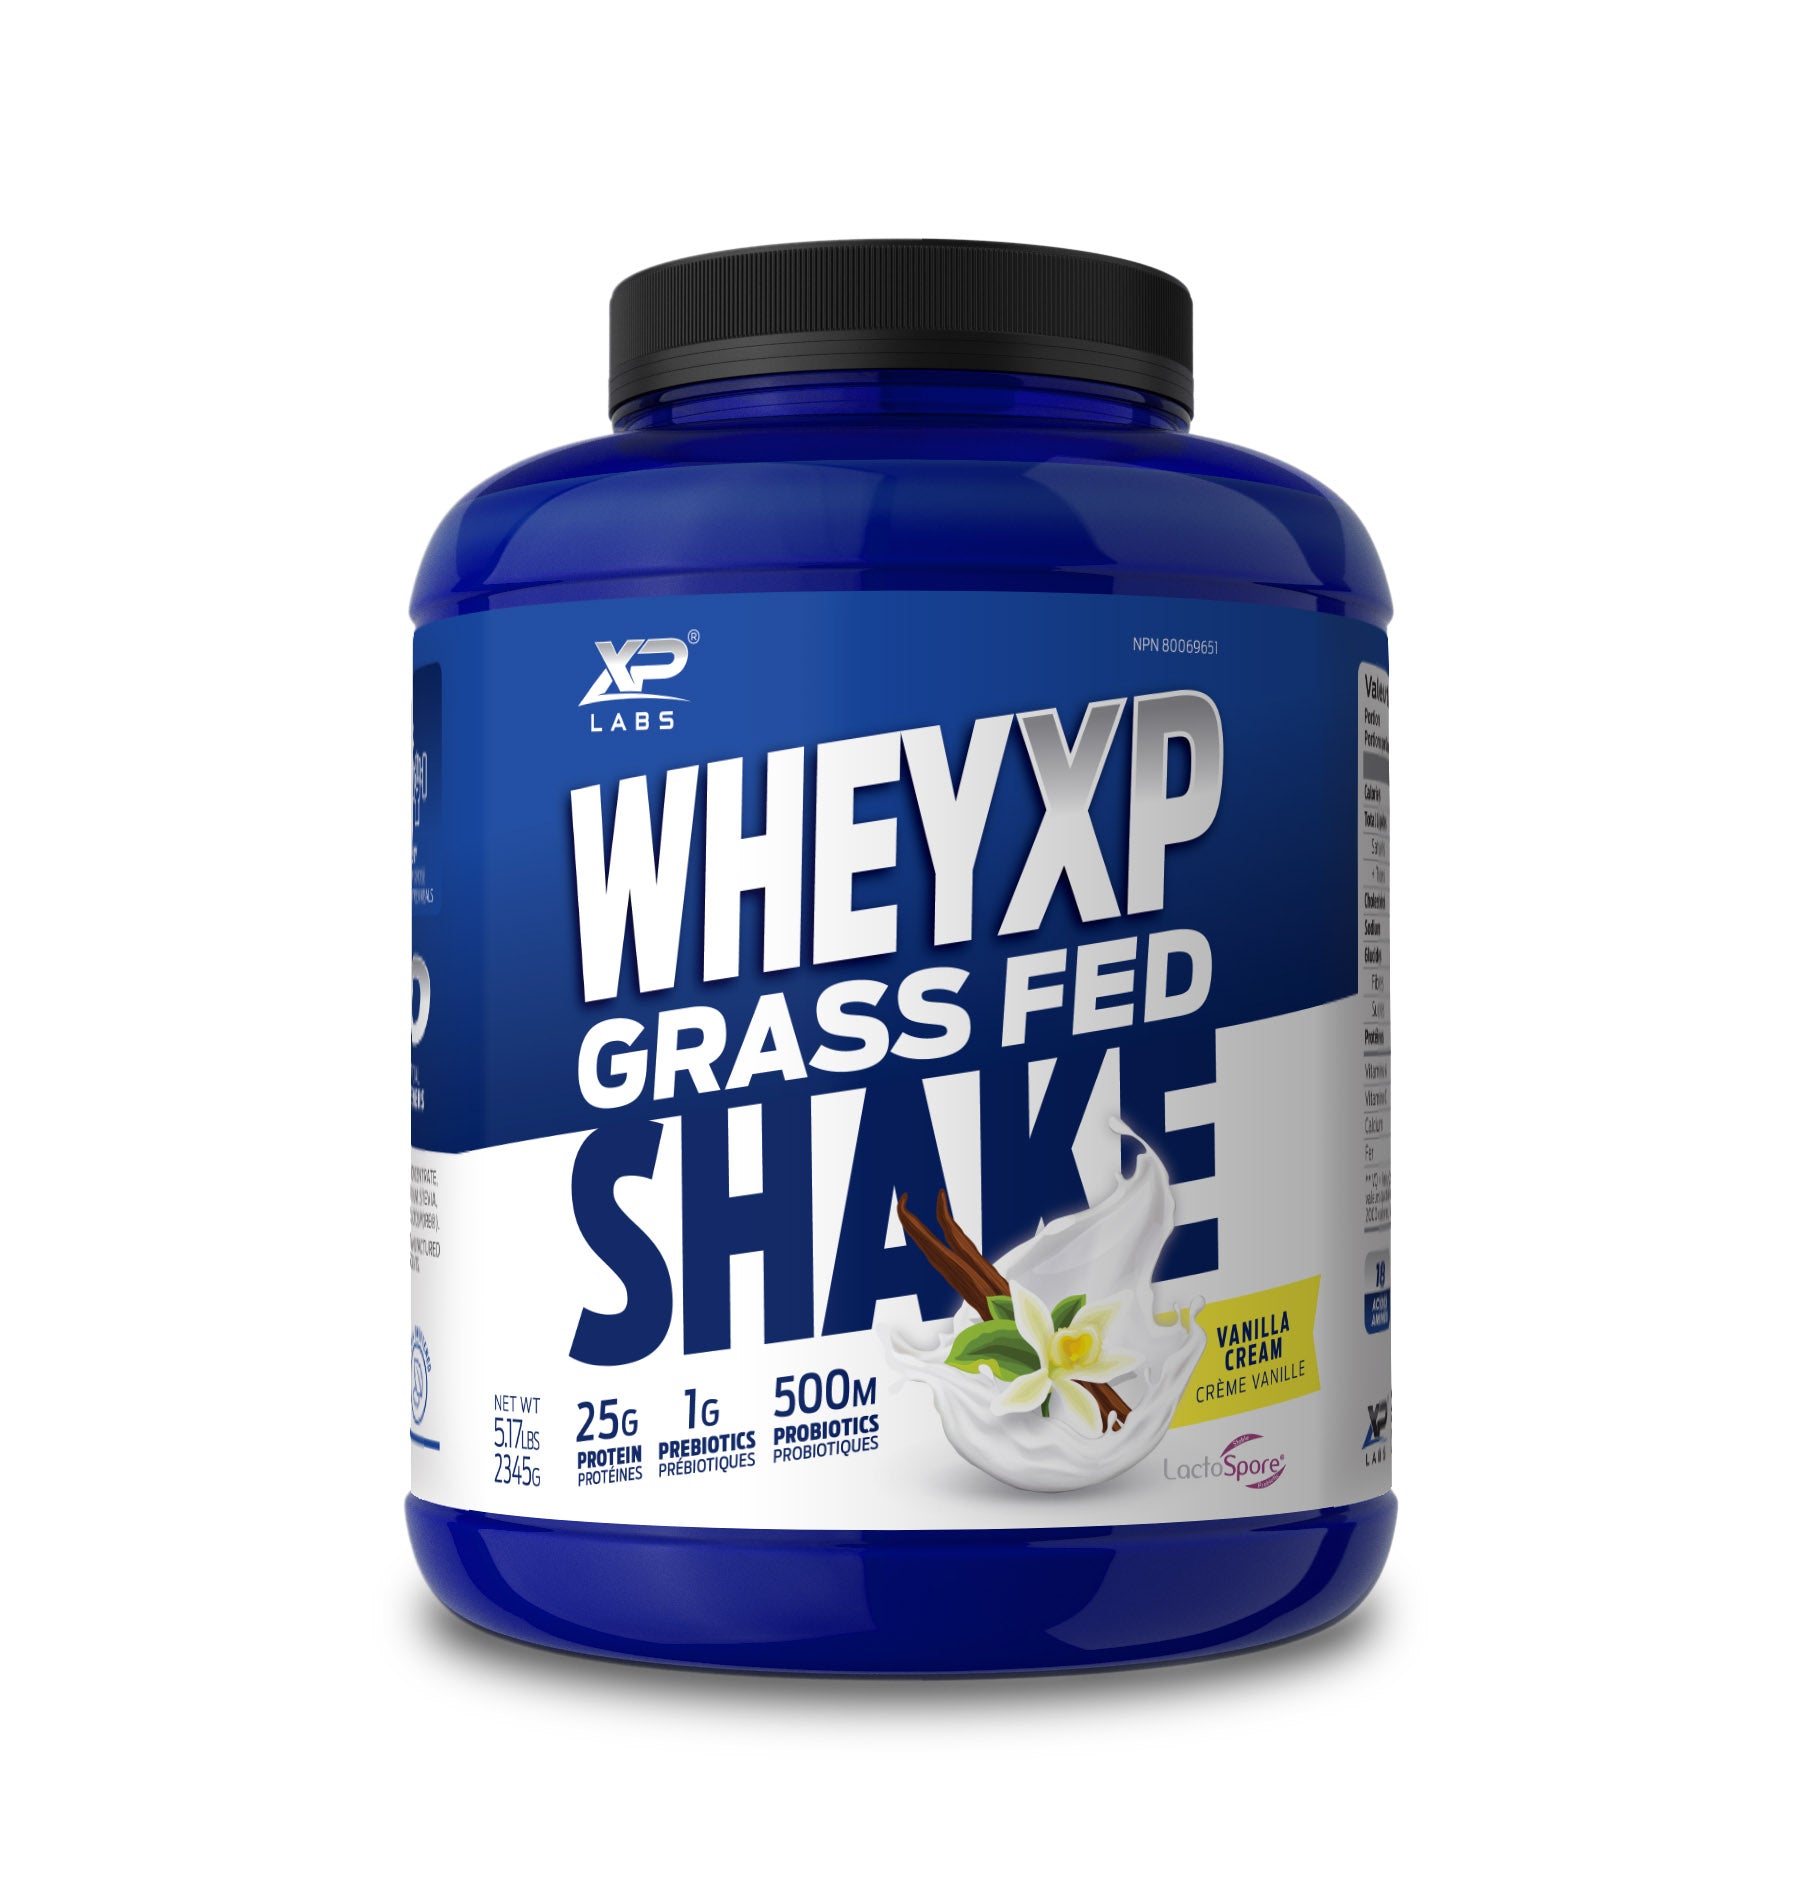 Canadian Protein Grass-Fed New Zealand Whey Protein Isolate –